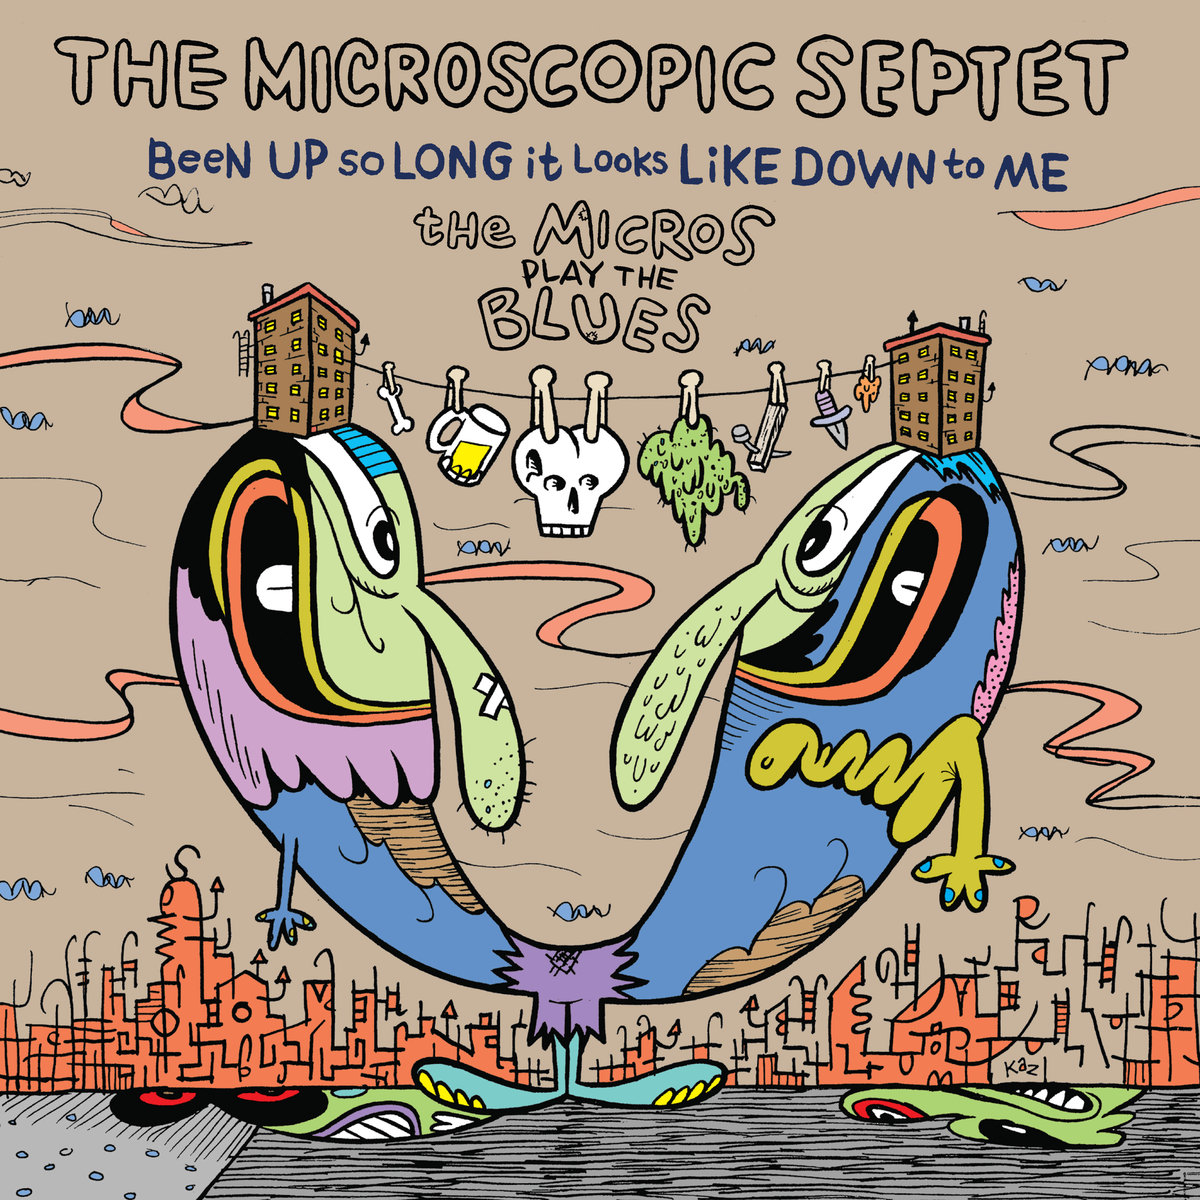 REVIEW: The Microscopic Septet - Been Up So Long It Looks Like Down To Me: The Micros Play the Blues